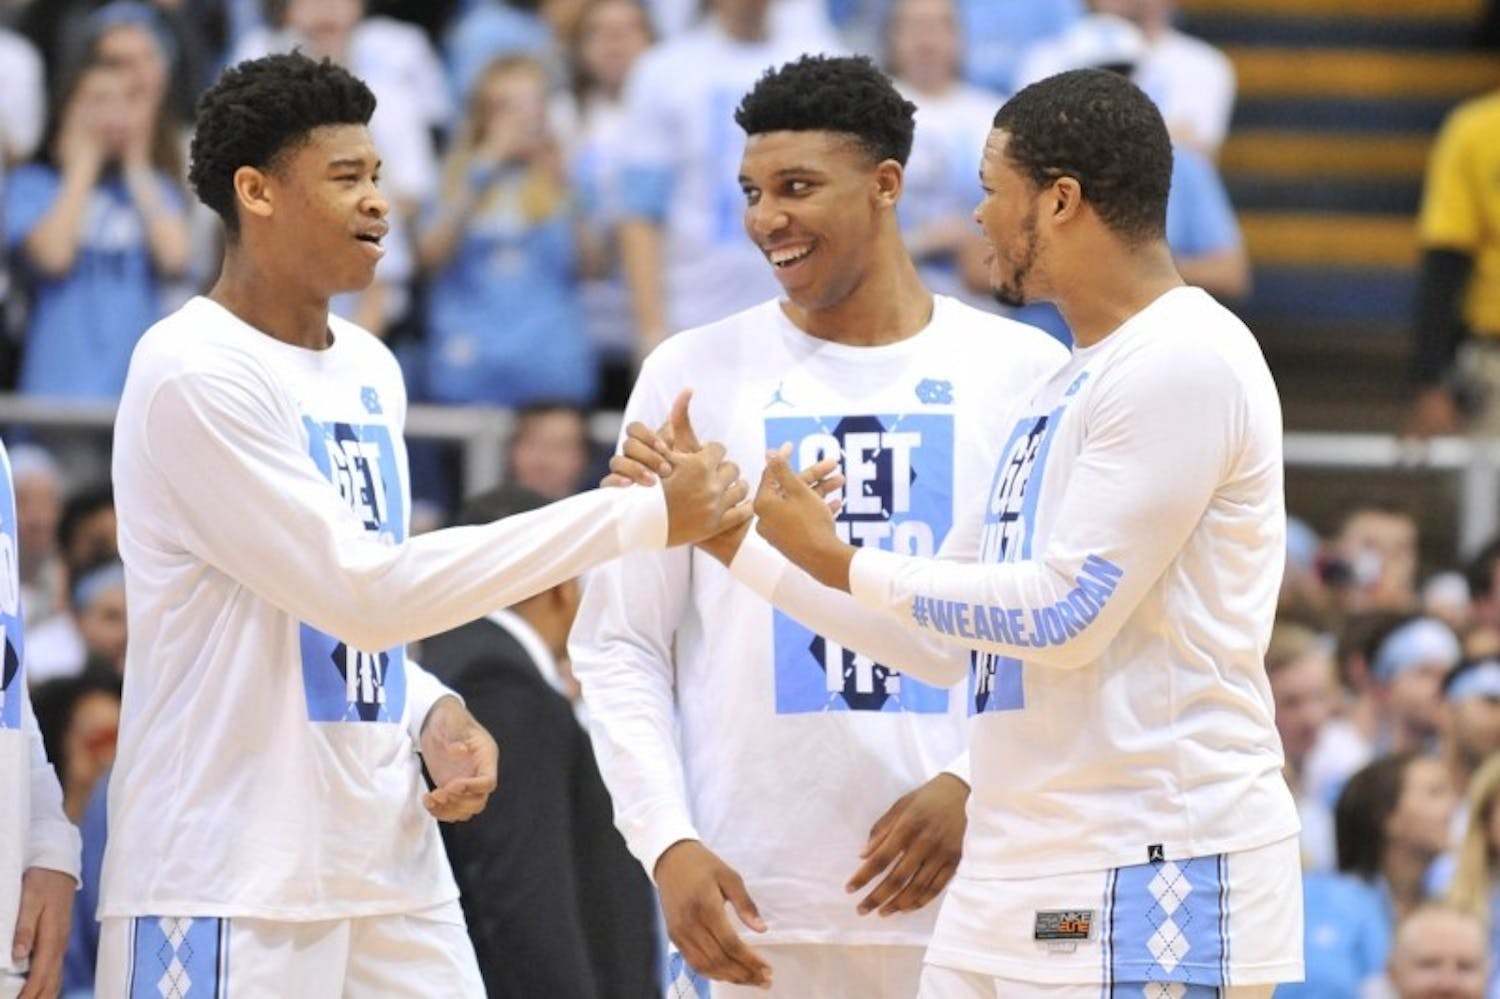 Senior forwards Isaiah Hicks (left) and Kennedy Meeks (right) signed with the Los Angeles Clippers and the Toronto Raptors, respectively.